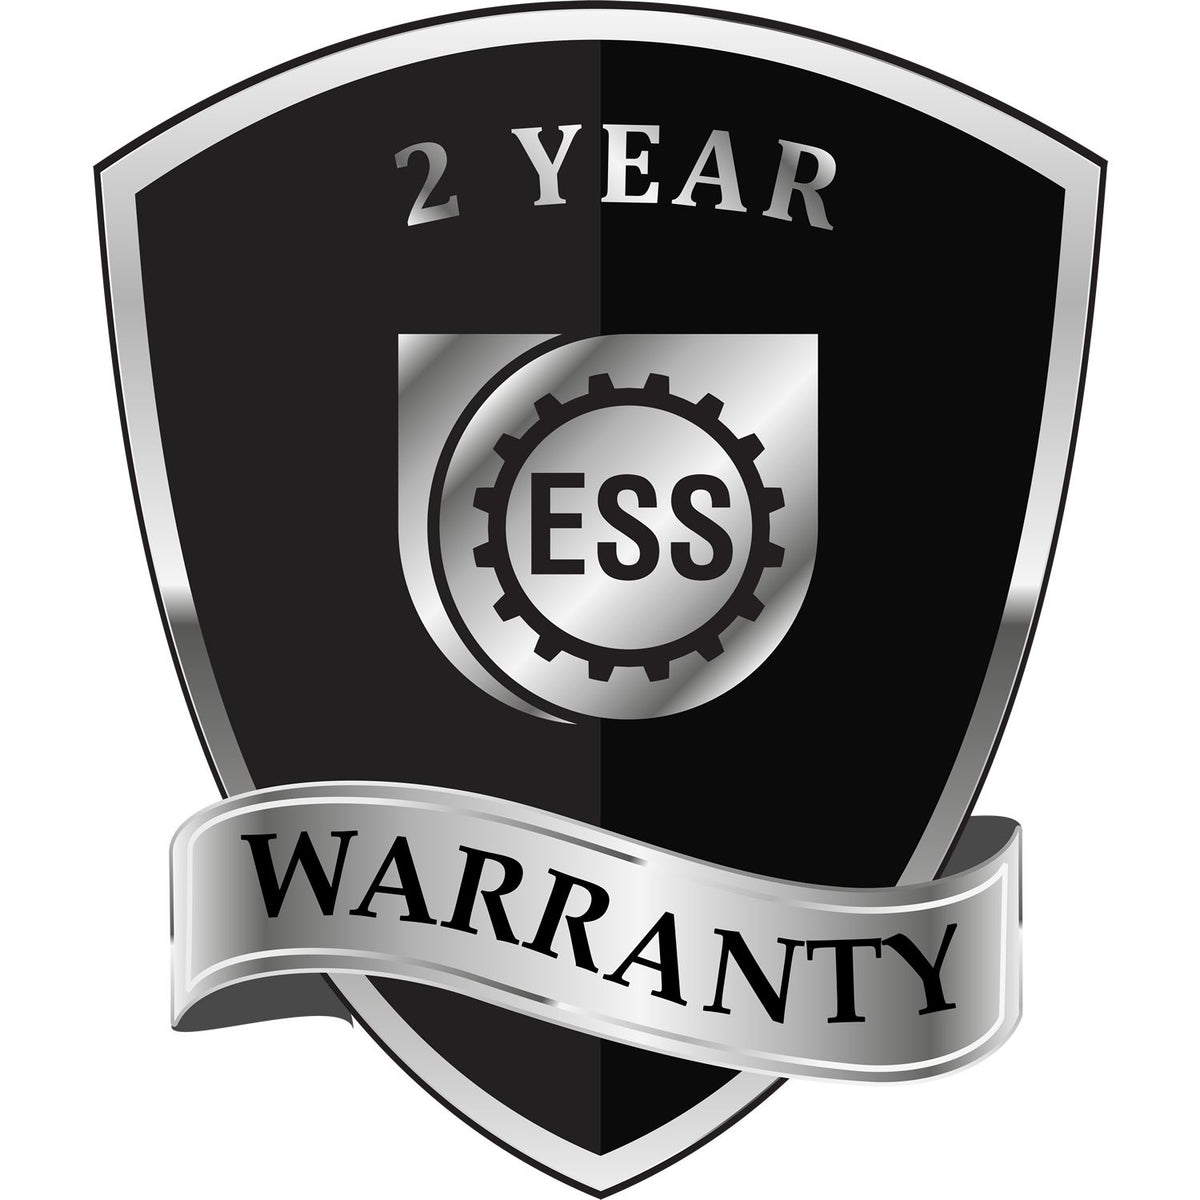 A badge or emblem showing a warranty icon for the Extended Long Reach Hawaii Surveyor Embosser